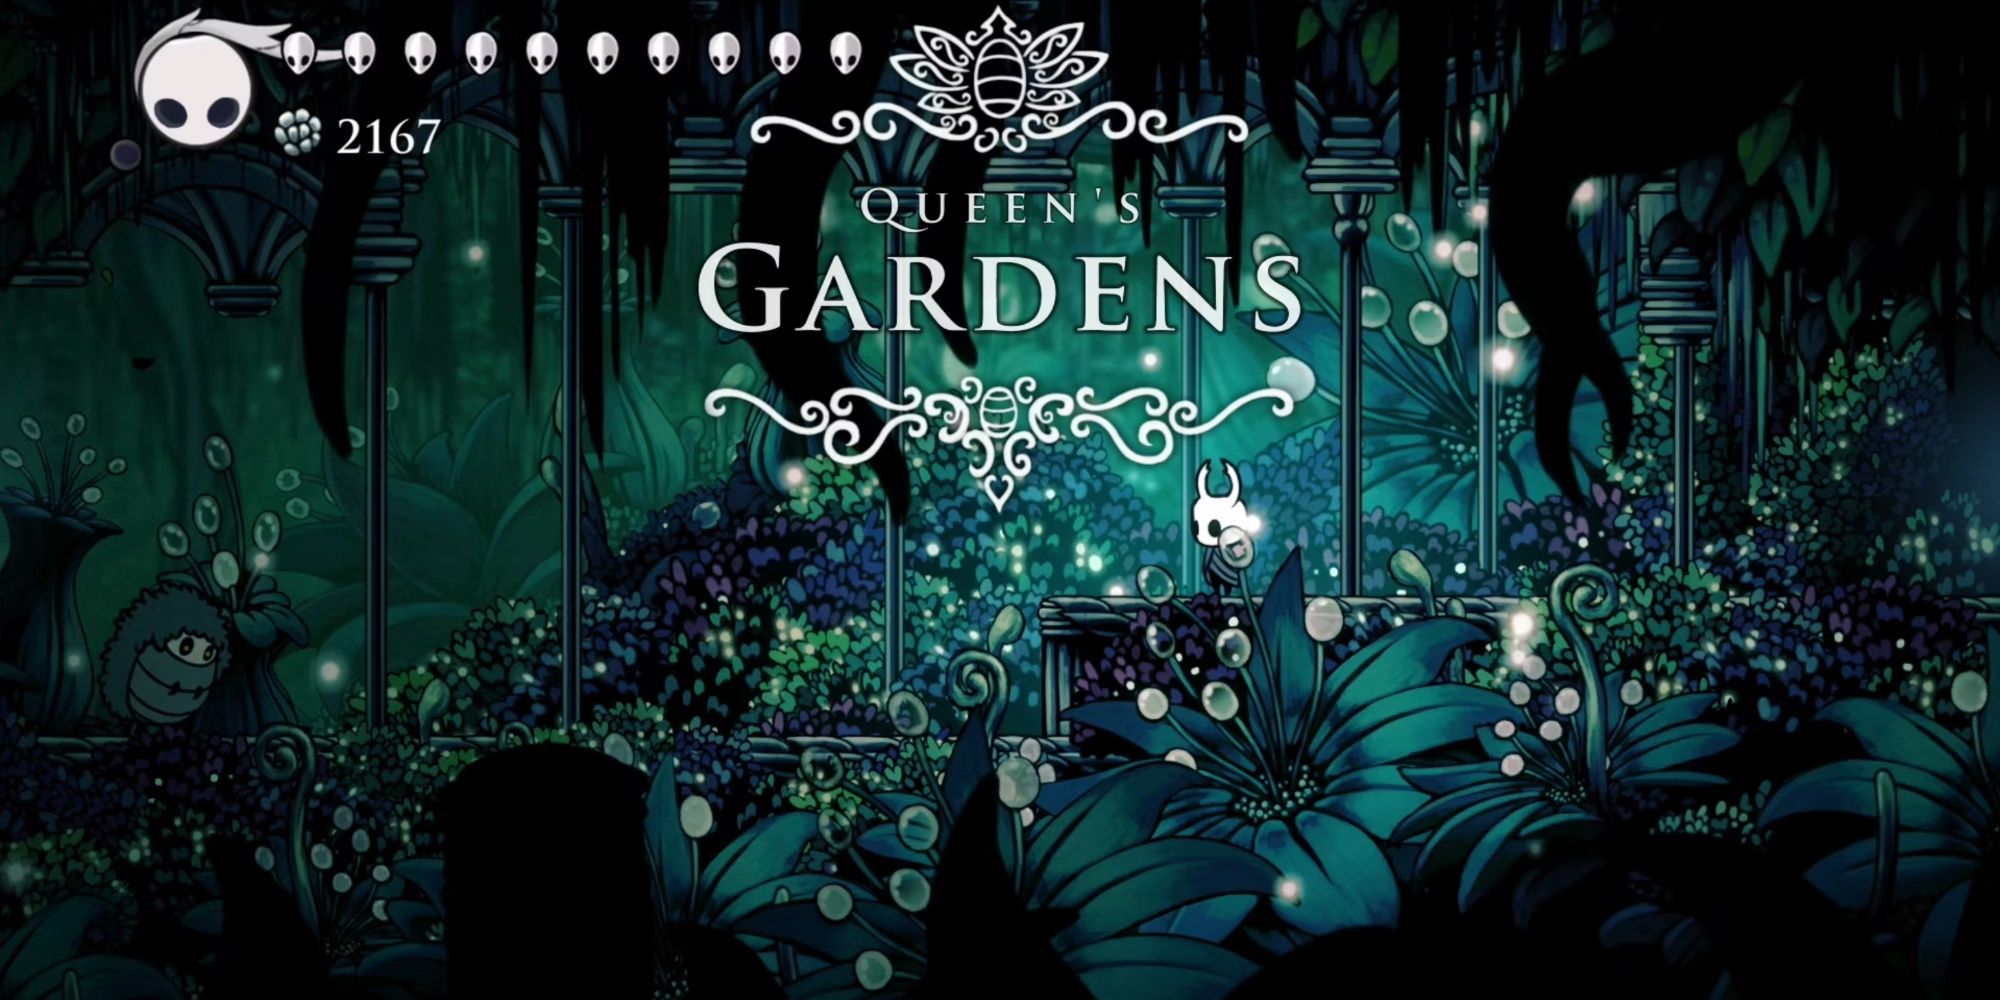 The Knight in the Queen's Gardens in Hollow Knight